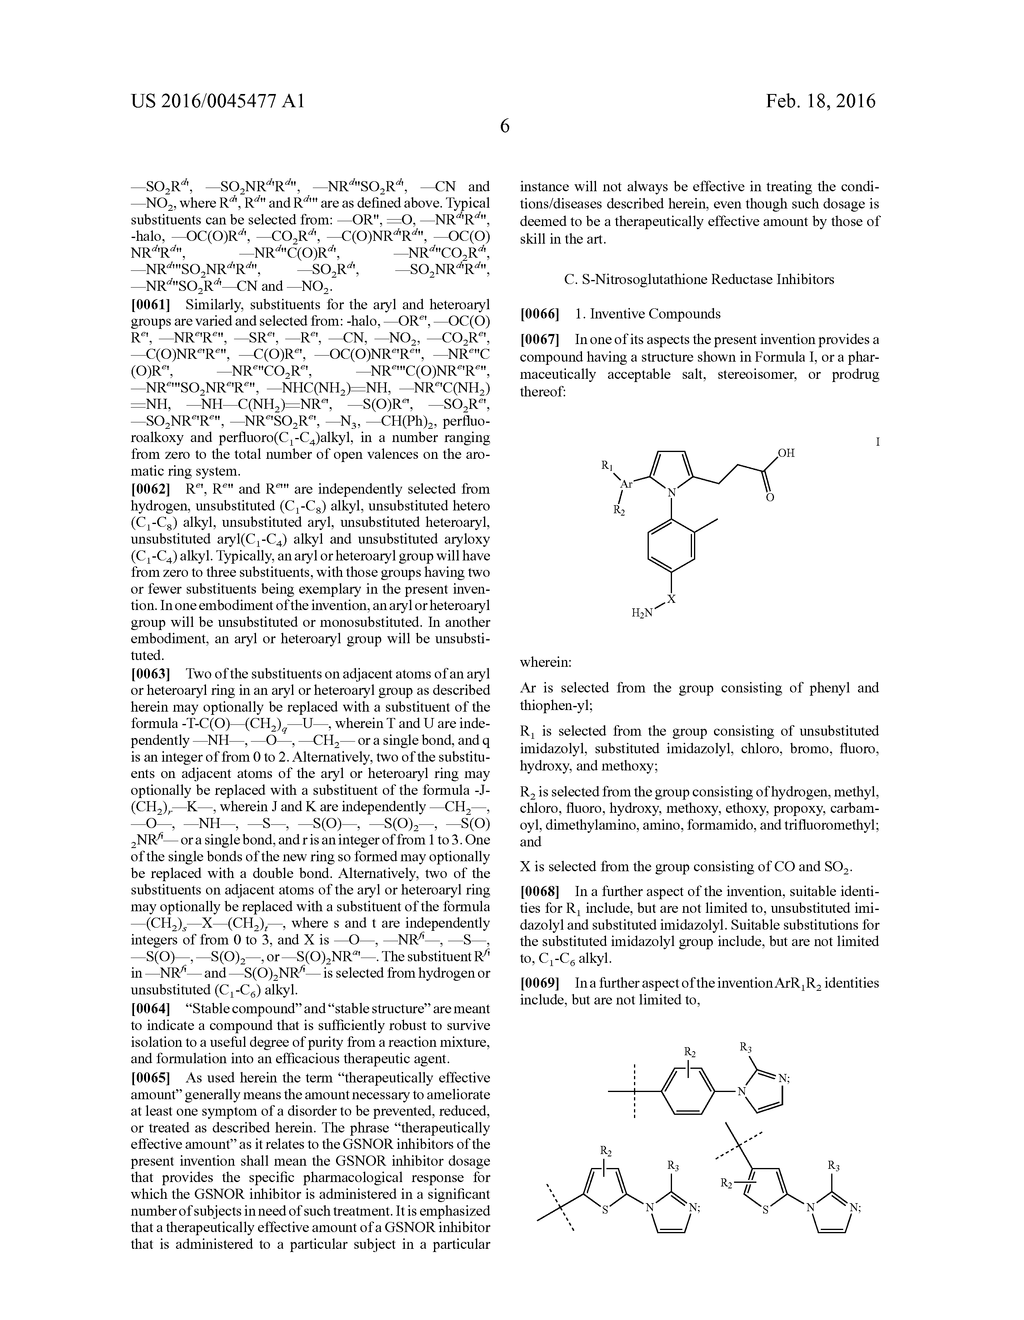 Novel Pyrrole Inhibitors of S-Nitrosoglutathione Reductase as Therapeutic     Agents - diagram, schematic, and image 07